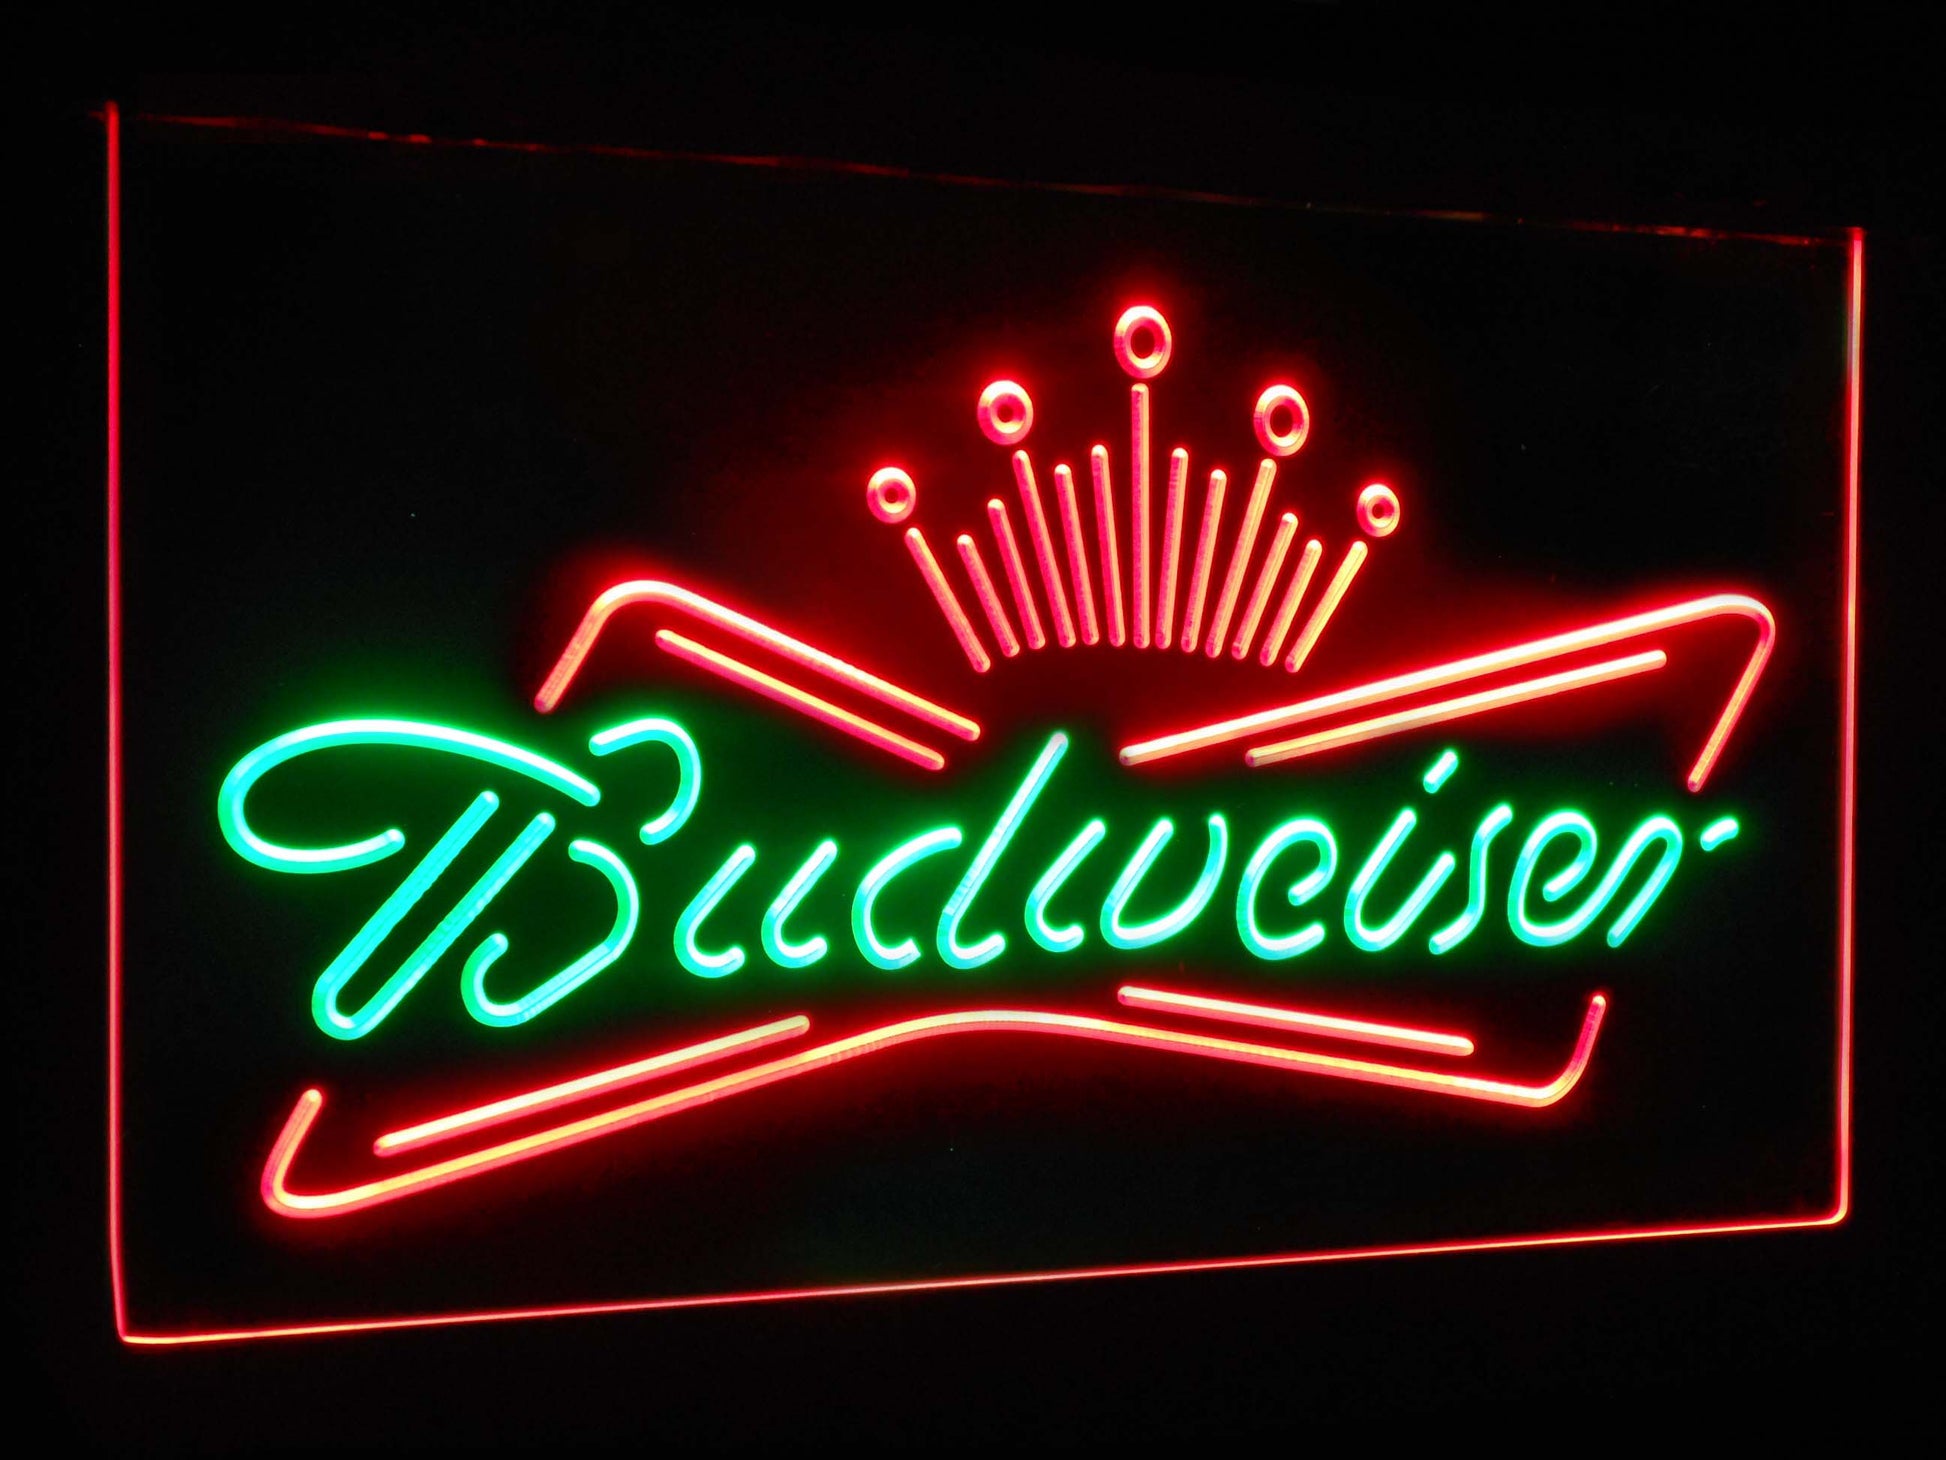 Budweiser King  Bar Decoration Gift Dual Color Led Neon Light Signs st6-a2005 by Woody Signs Co. - Handmade Crafted Unique Wooden Creative